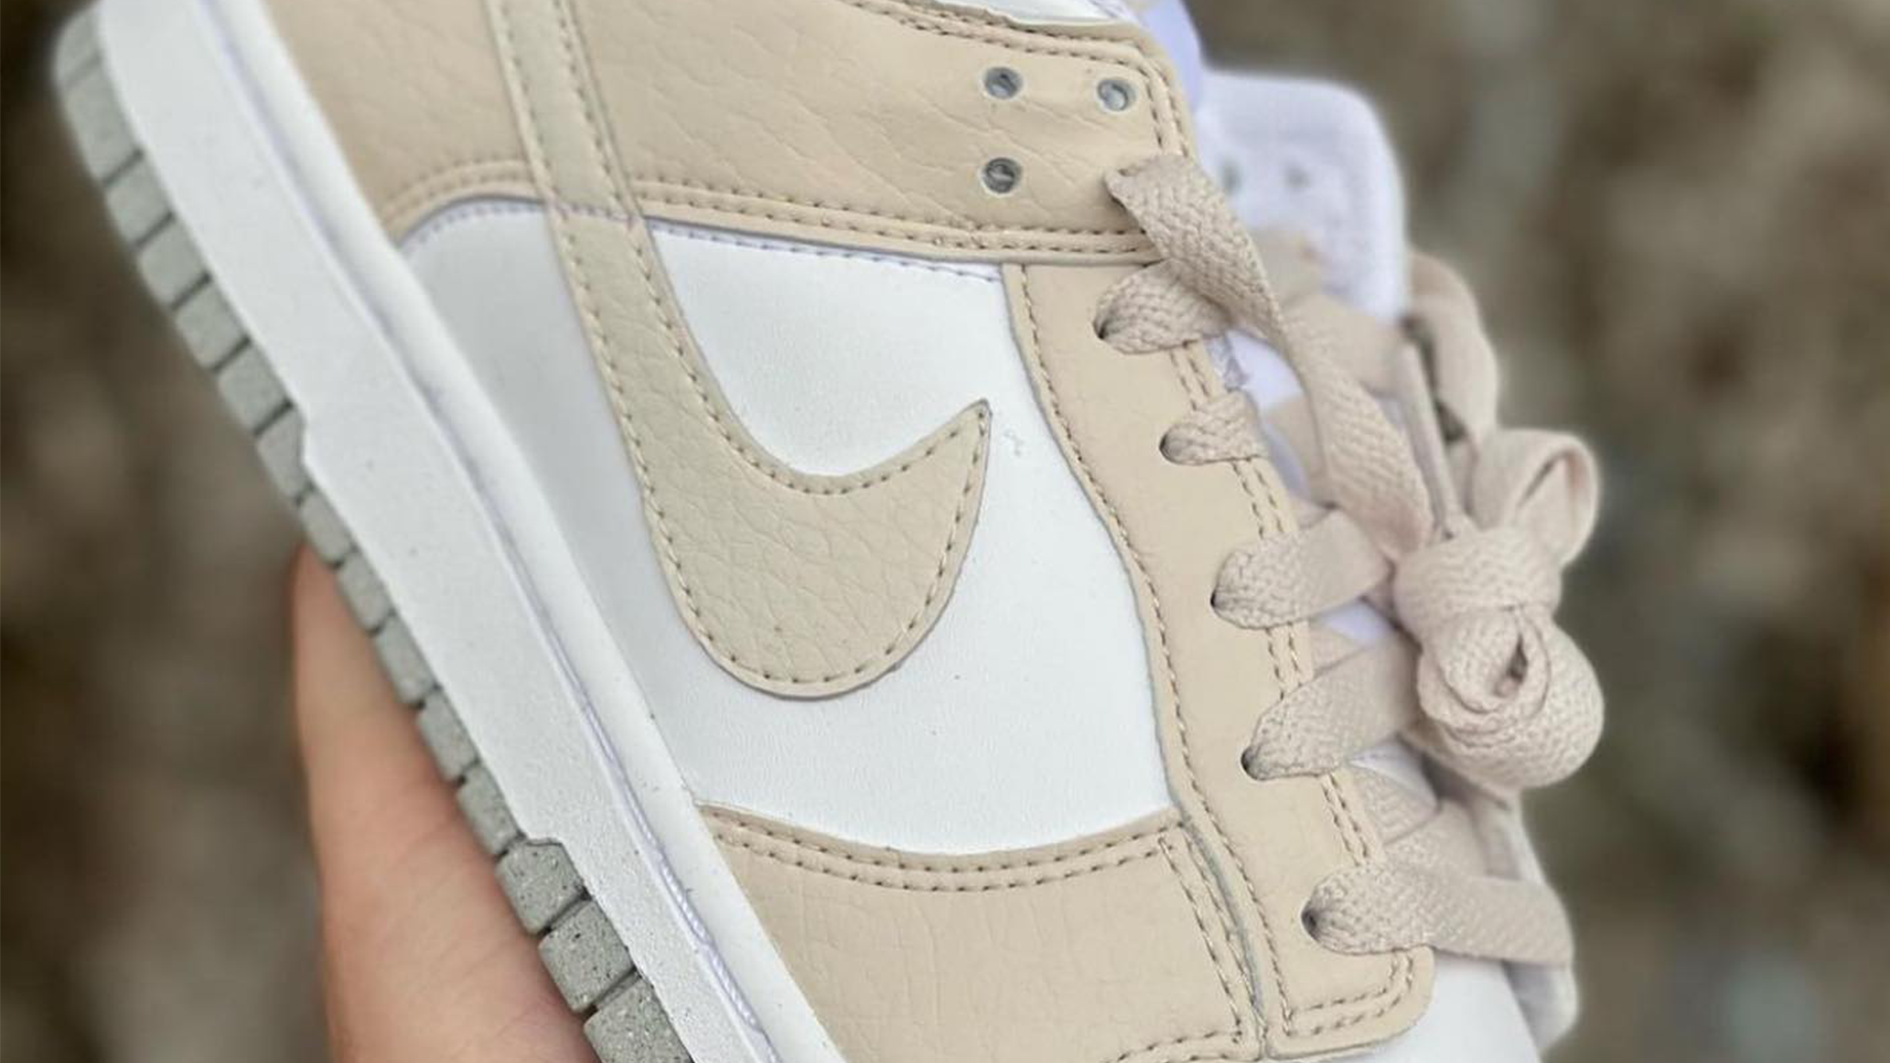 New Images of The Next Neutral-Toned Dunk Low Have Emerged | The ...